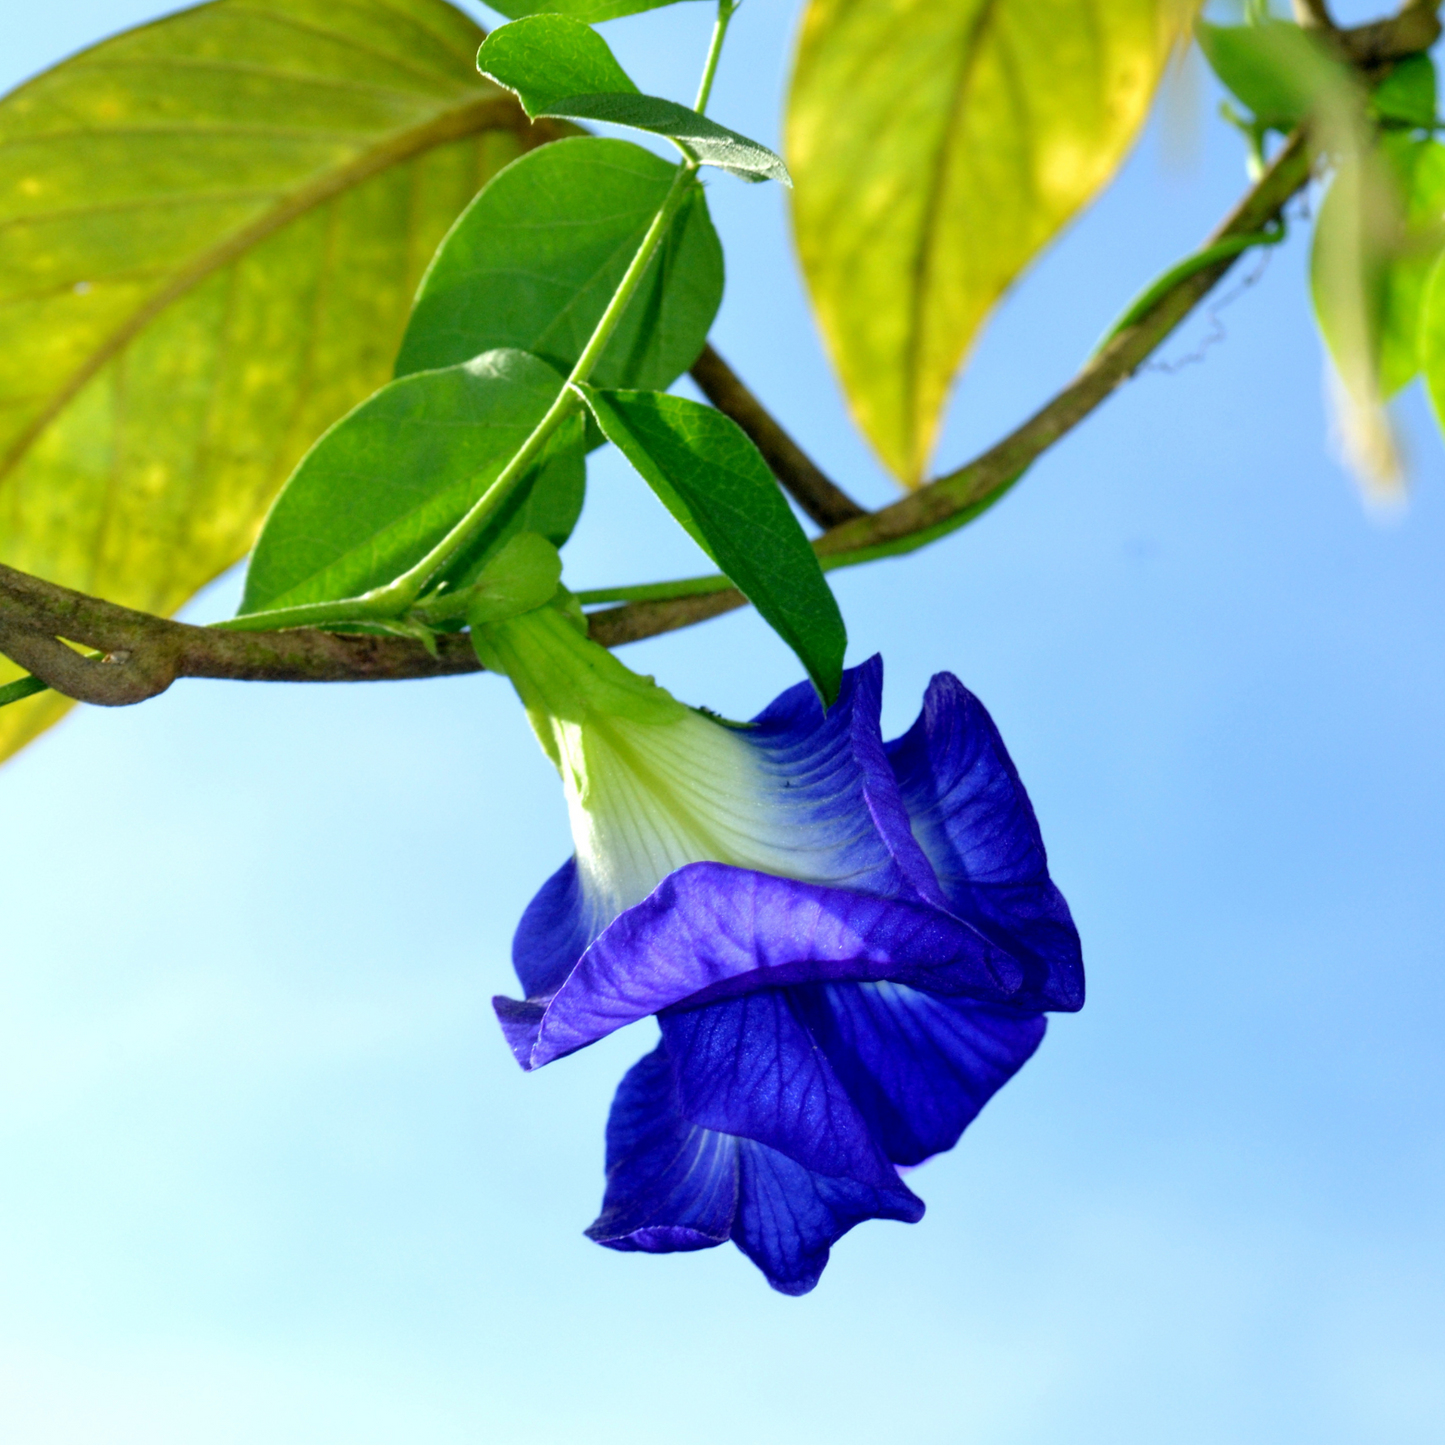 Witchy Pooh's Butterfly Pea Flower Loose Leaf Herbal Blue Colored Tea, Add Lime to Turn Purple!